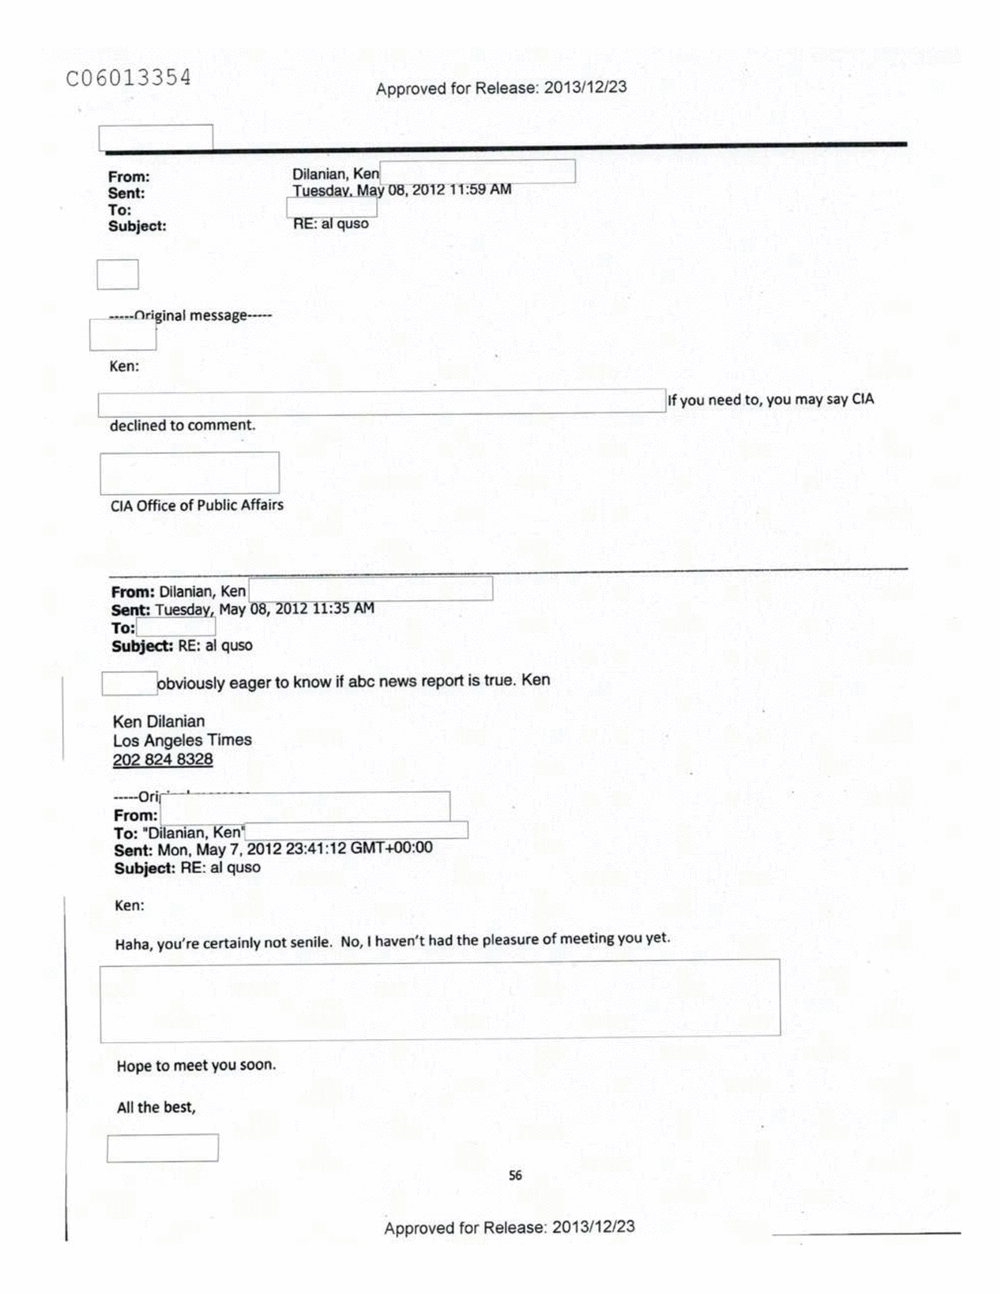 Page 270 from Email Correspondence Between Reporters and CIA Flacks